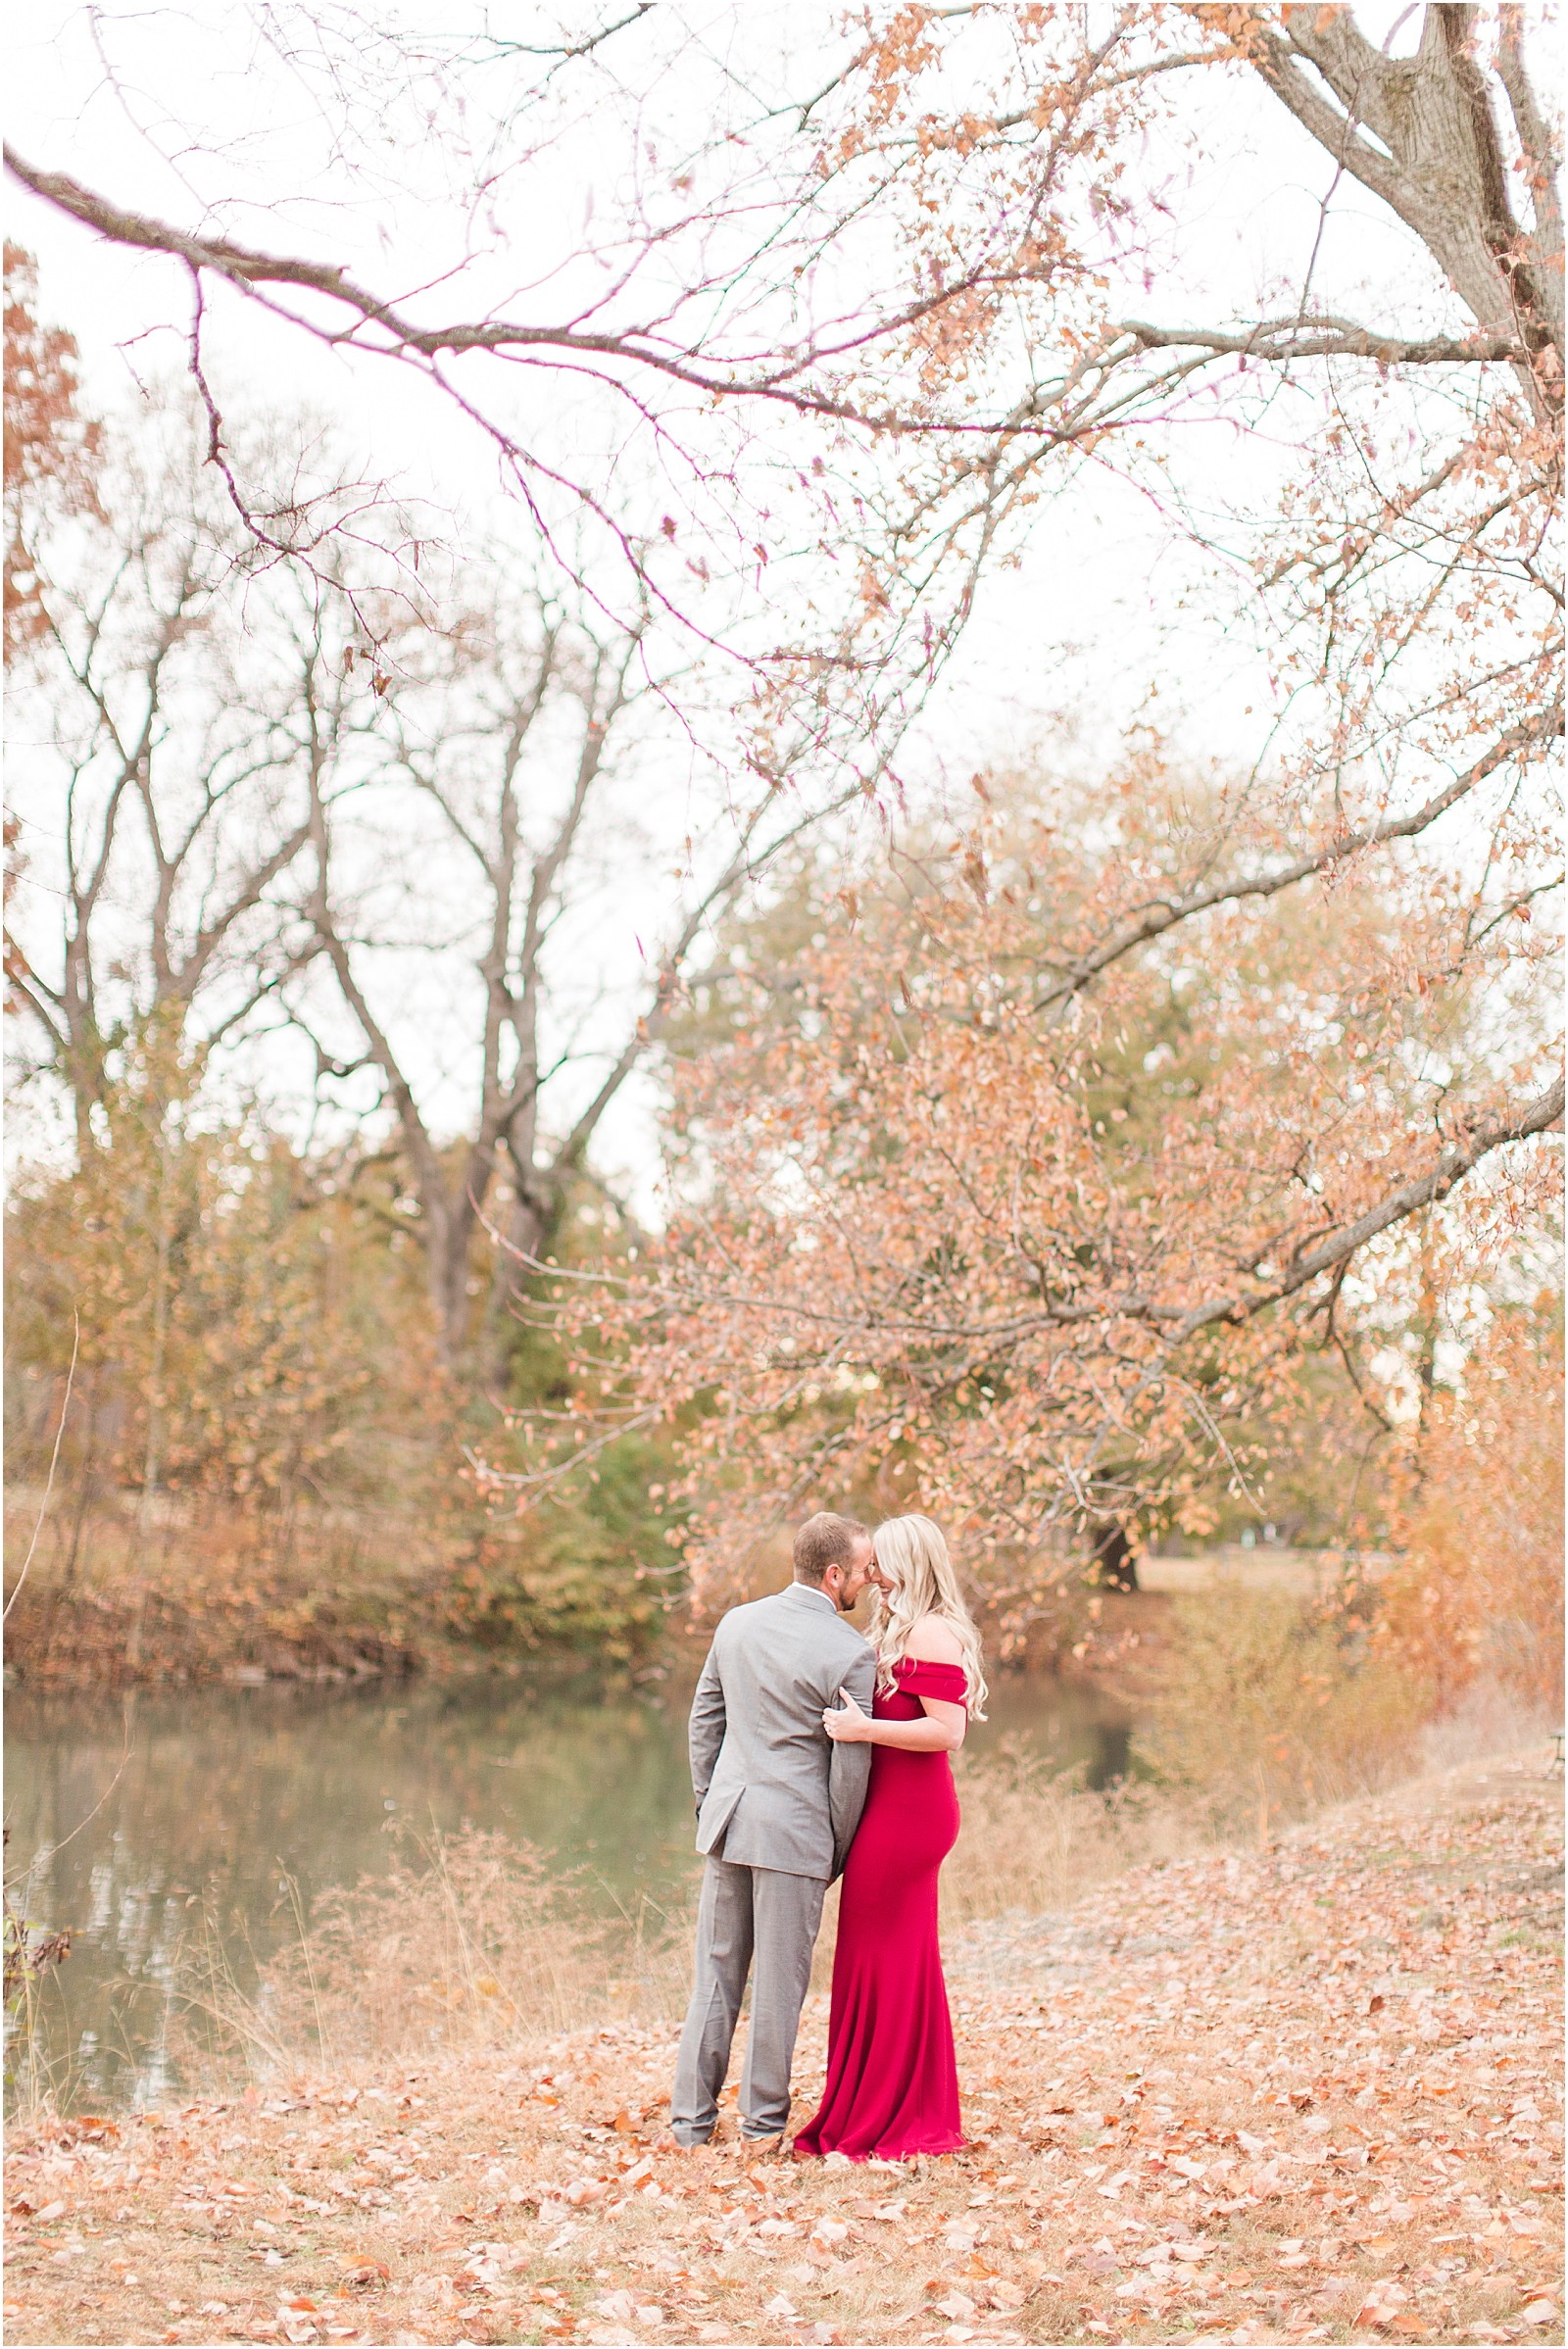 A Perfect Fall Engagement Session at Evansville State Park | Jamie and Max | Bret and Brandie Photography 038.jpg